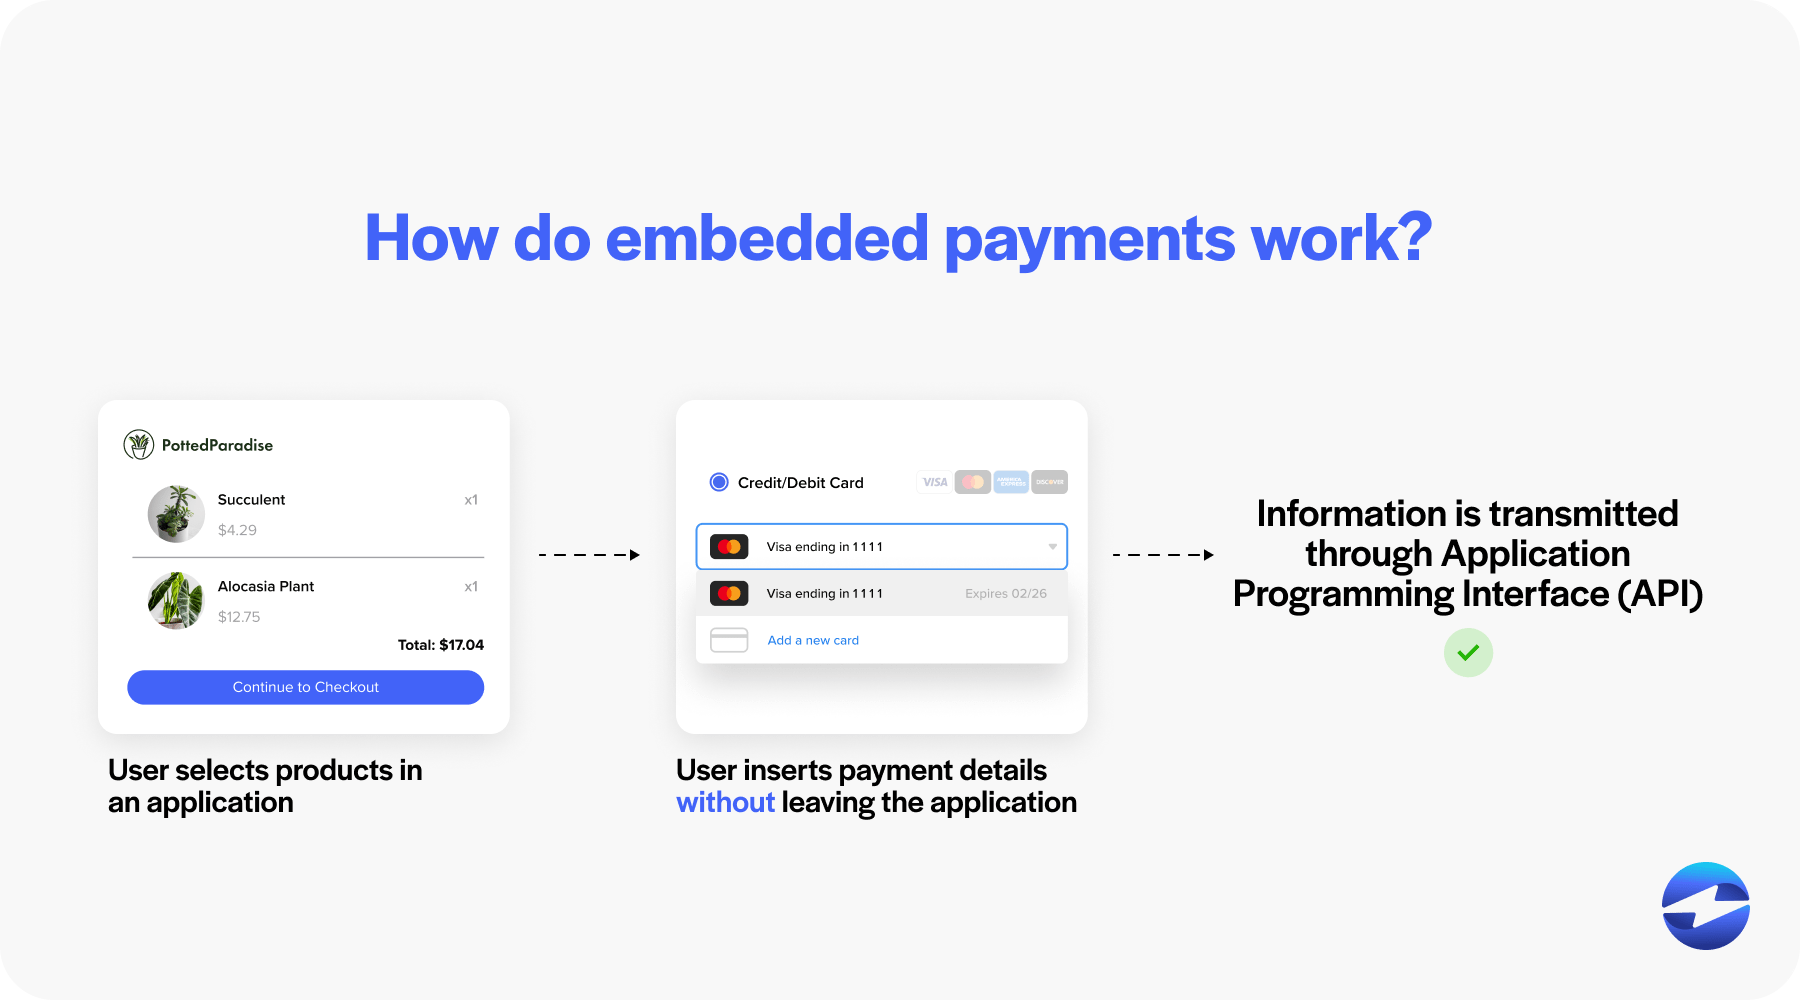 How do embedded payments work